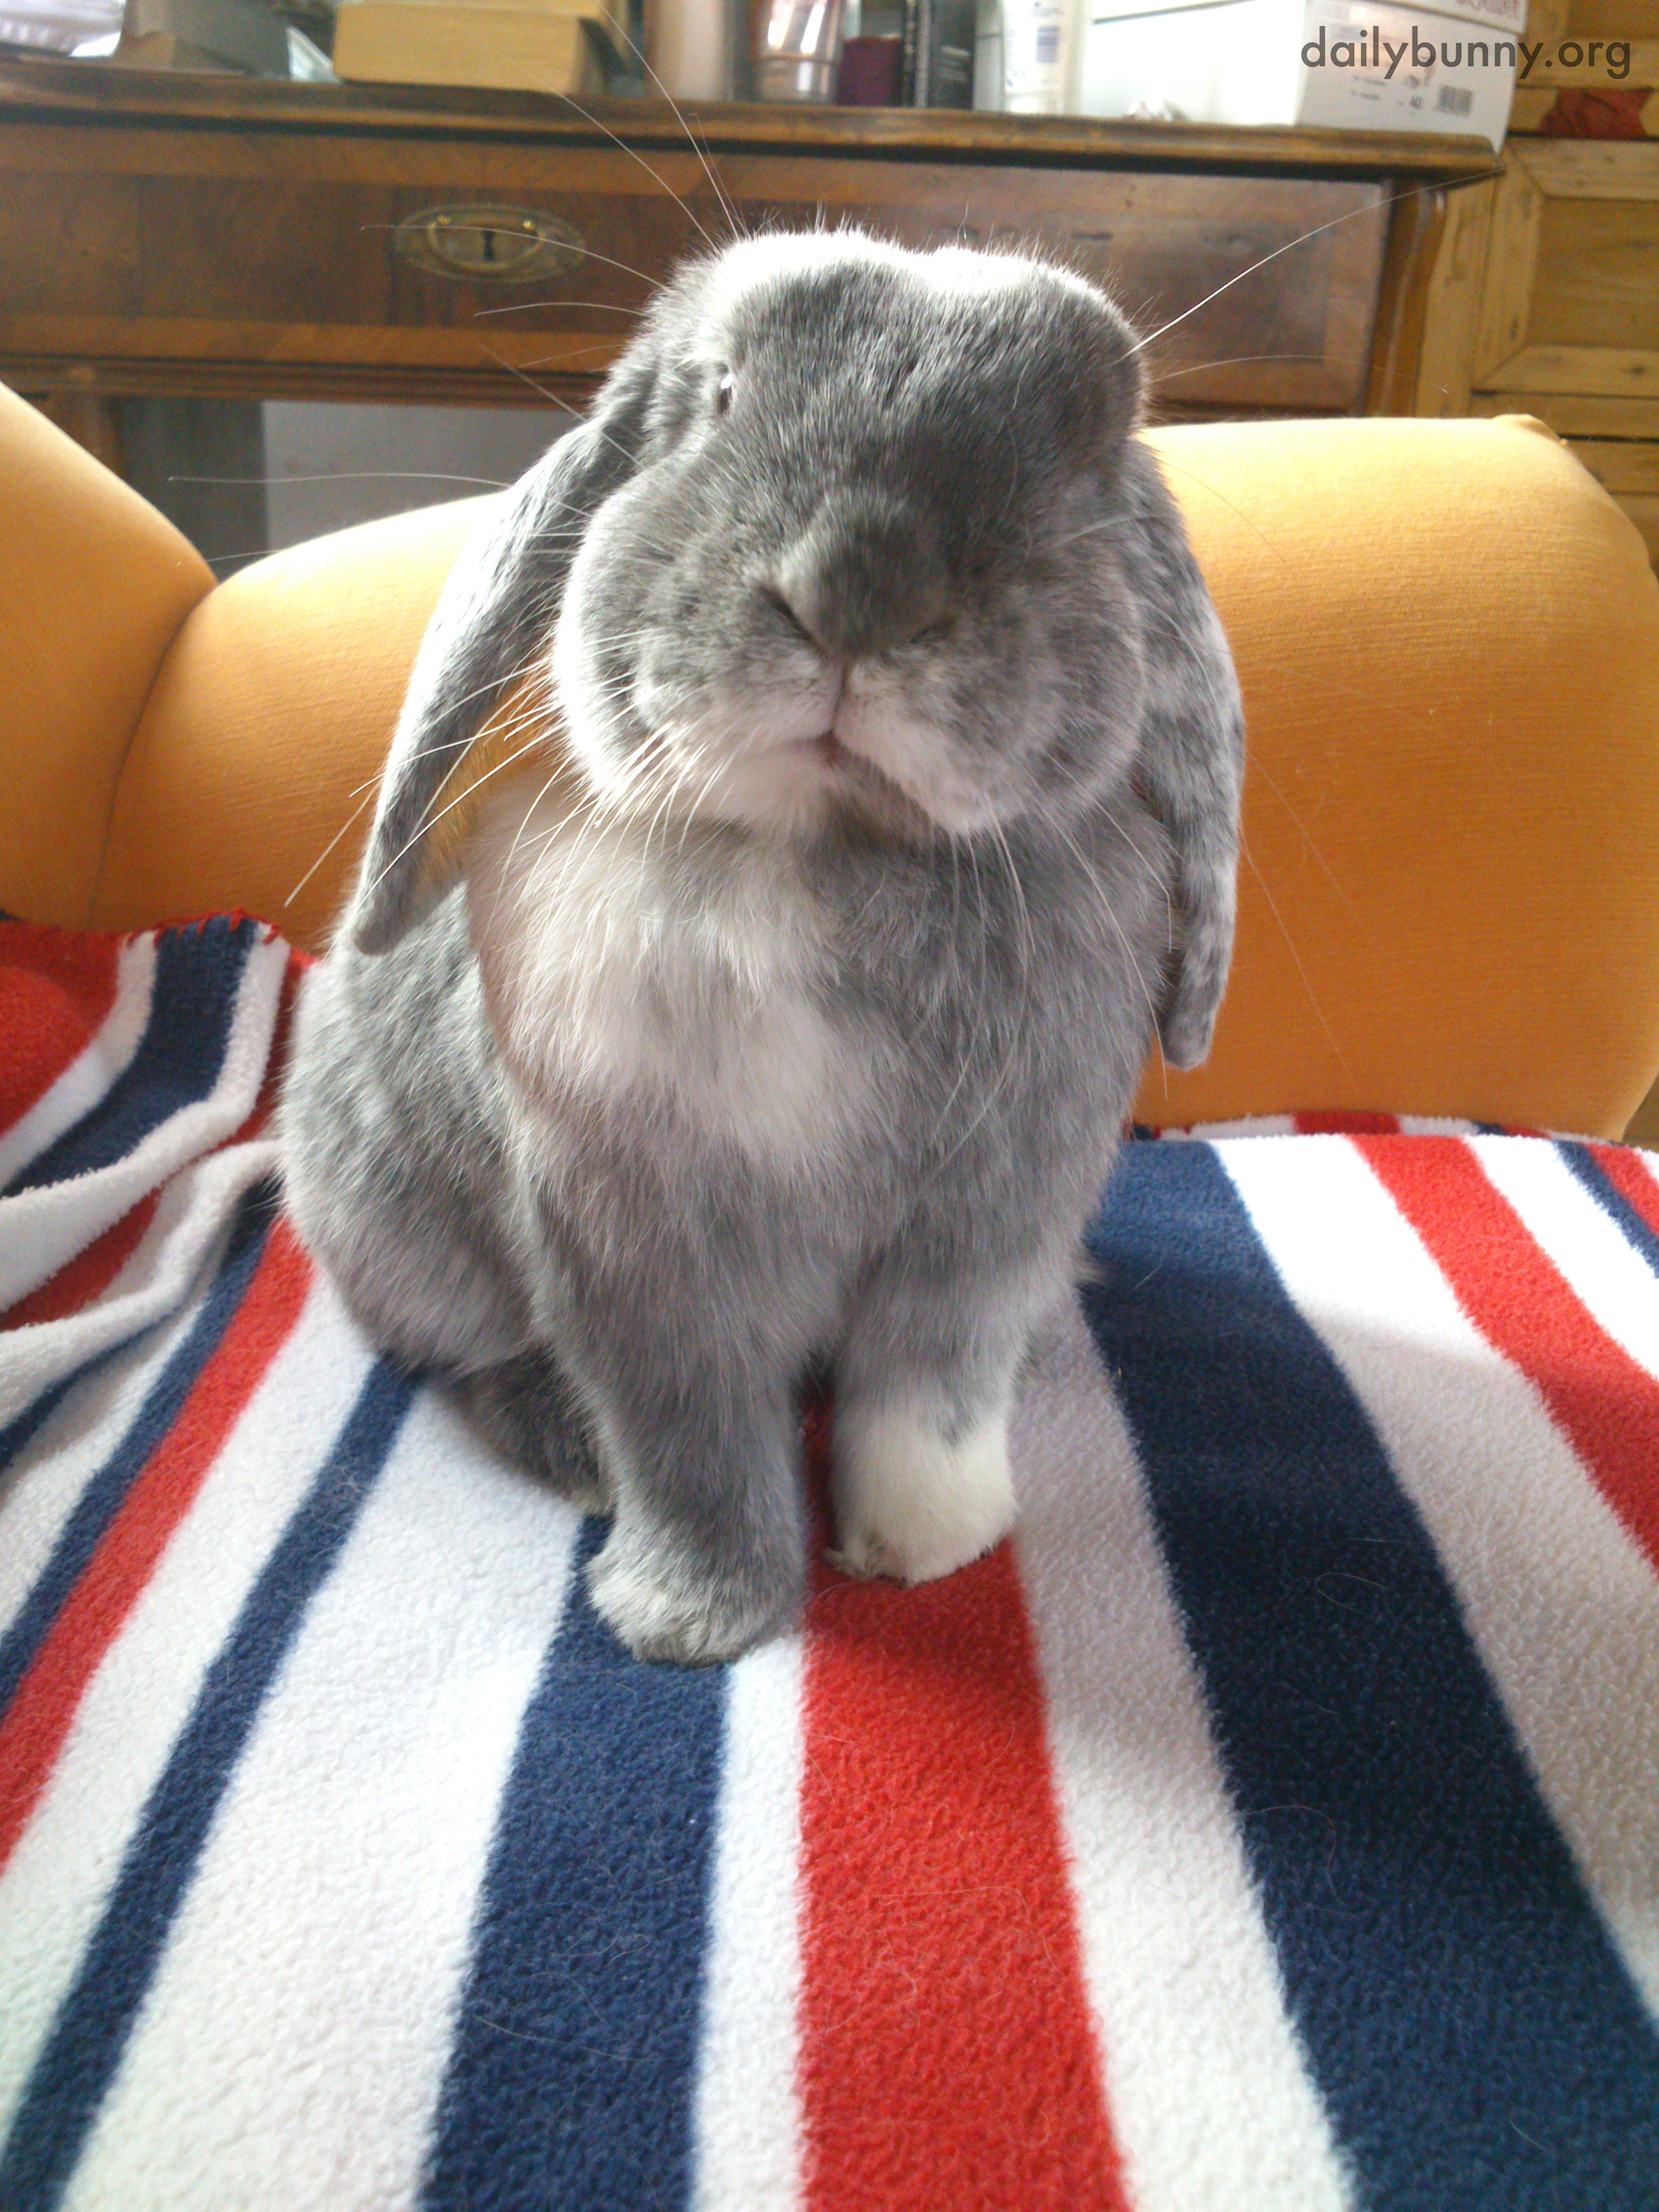 Bunny Can Look Distinguished and Inquisitive 2